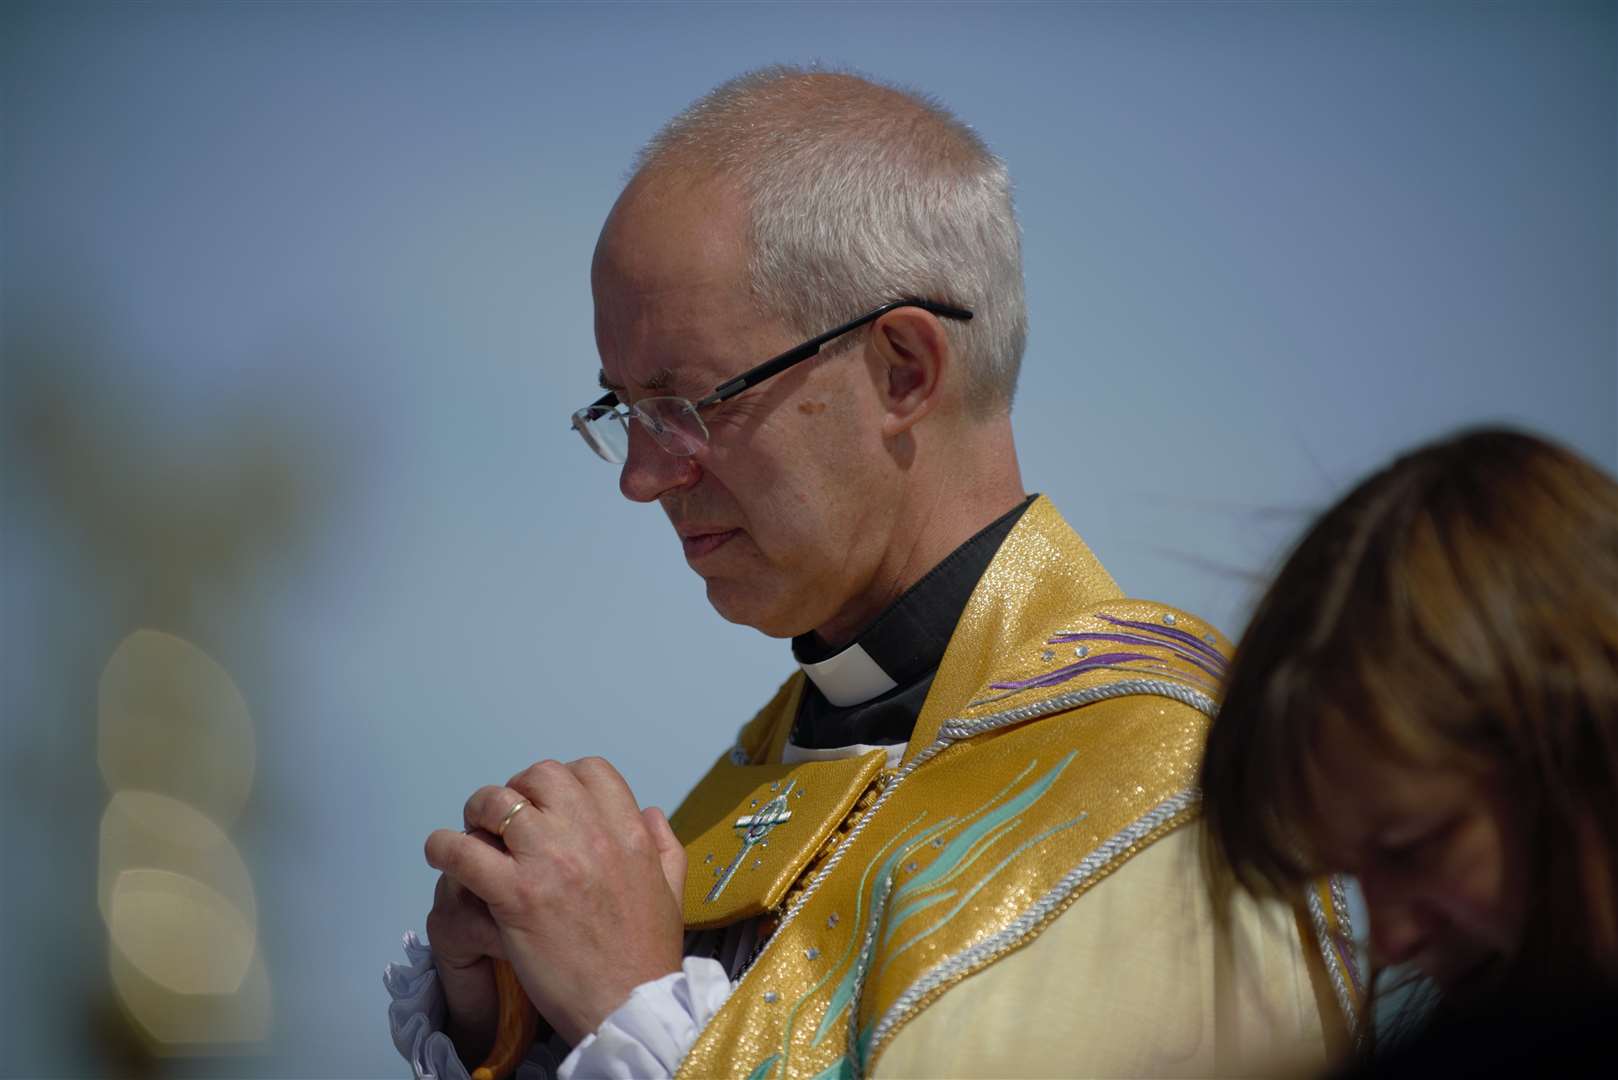 The Archbishop of Canterbury sent a message of solidarity to Sri Lanka